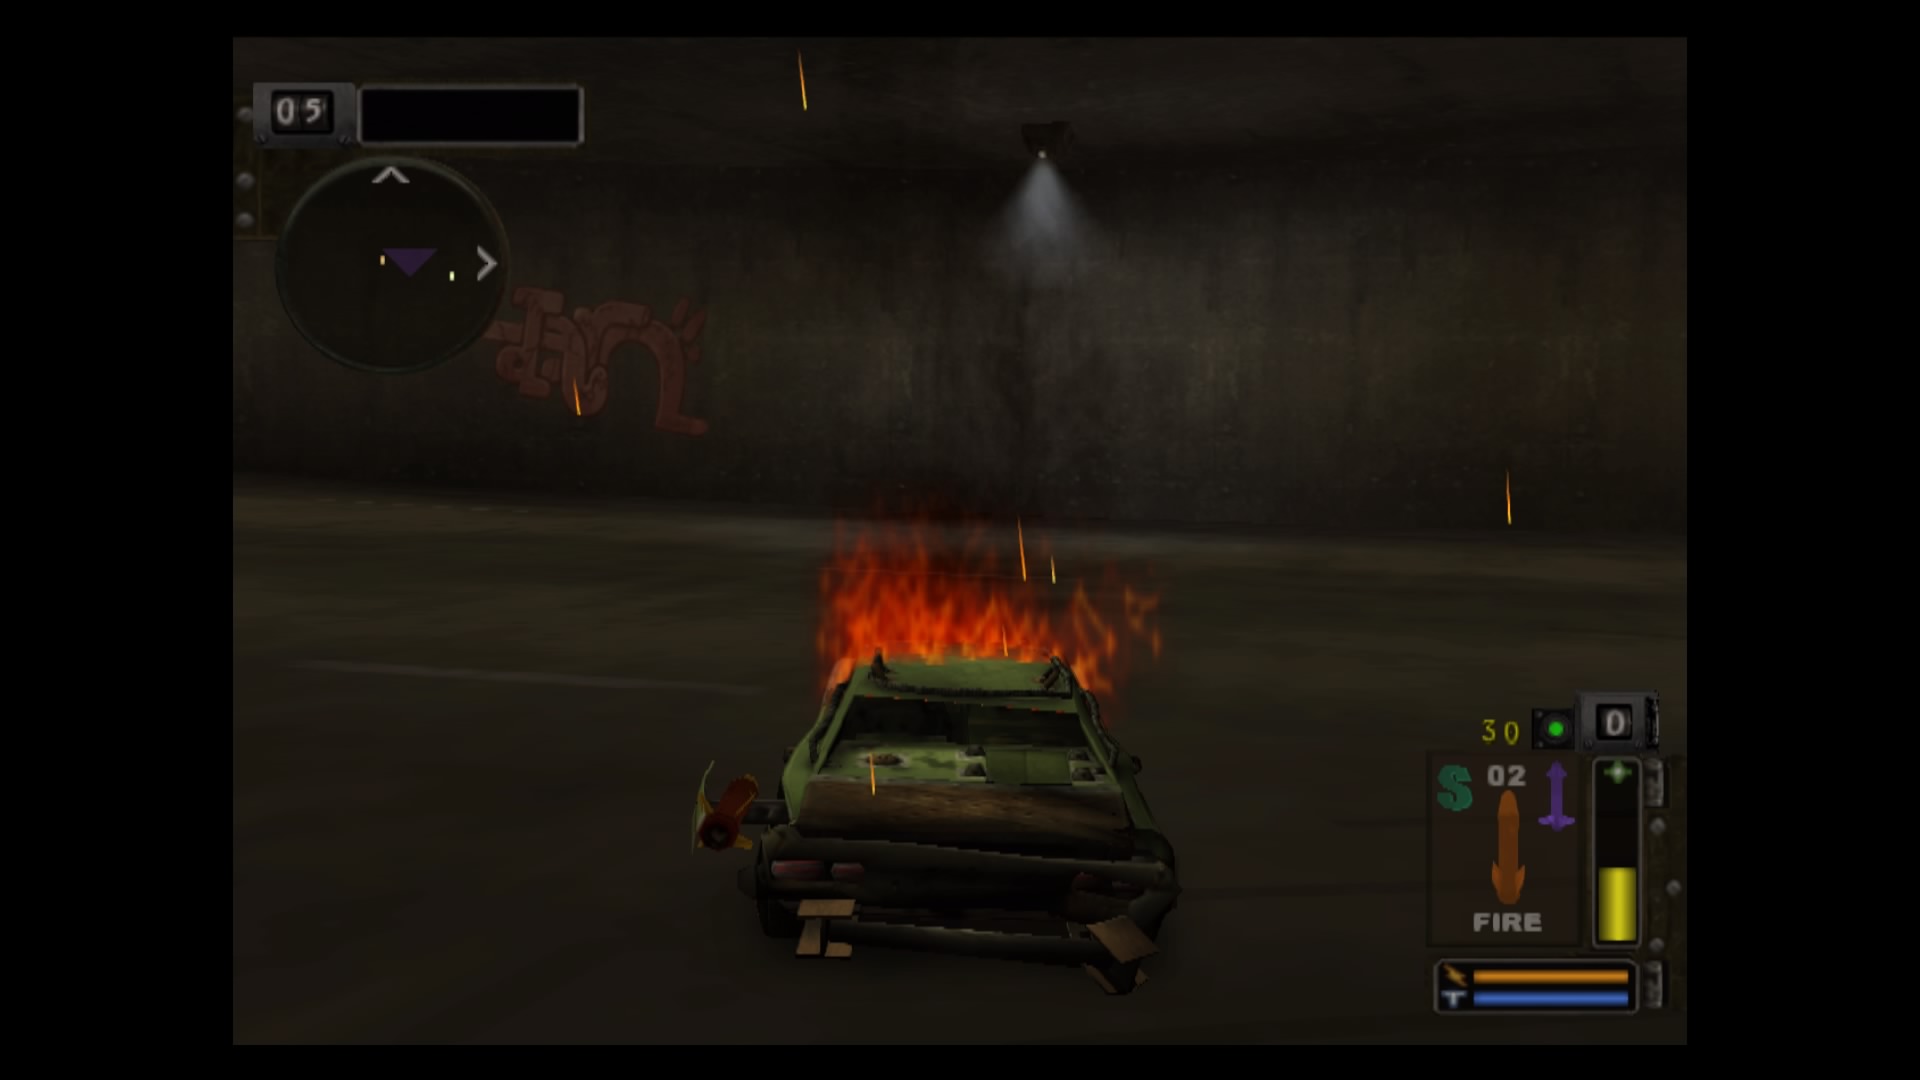 Twisted Metal Black PS4 Revisited